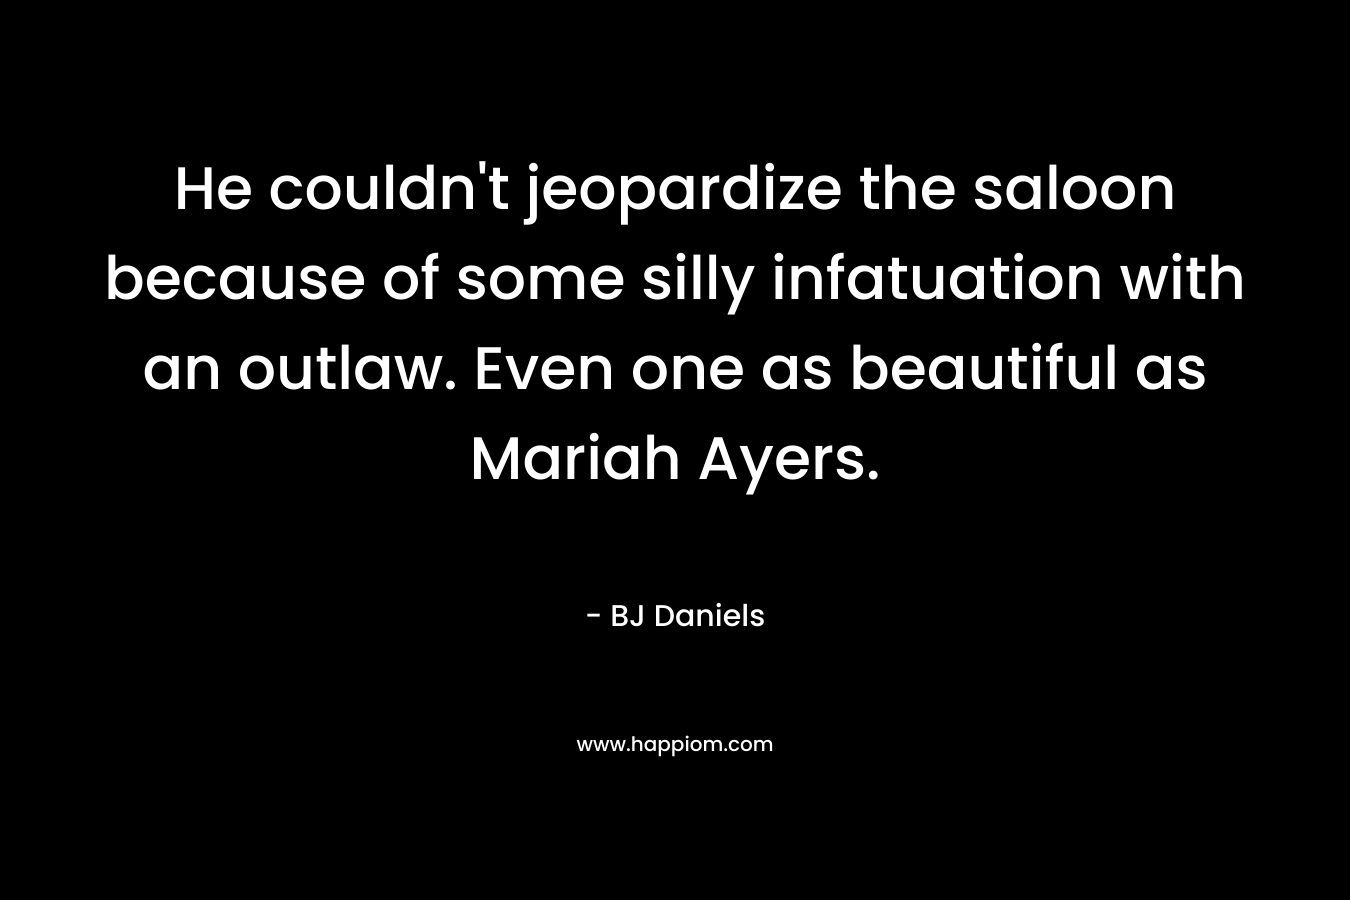 He couldn't jeopardize the saloon because of some silly infatuation with an outlaw. Even one as beautiful as Mariah Ayers.